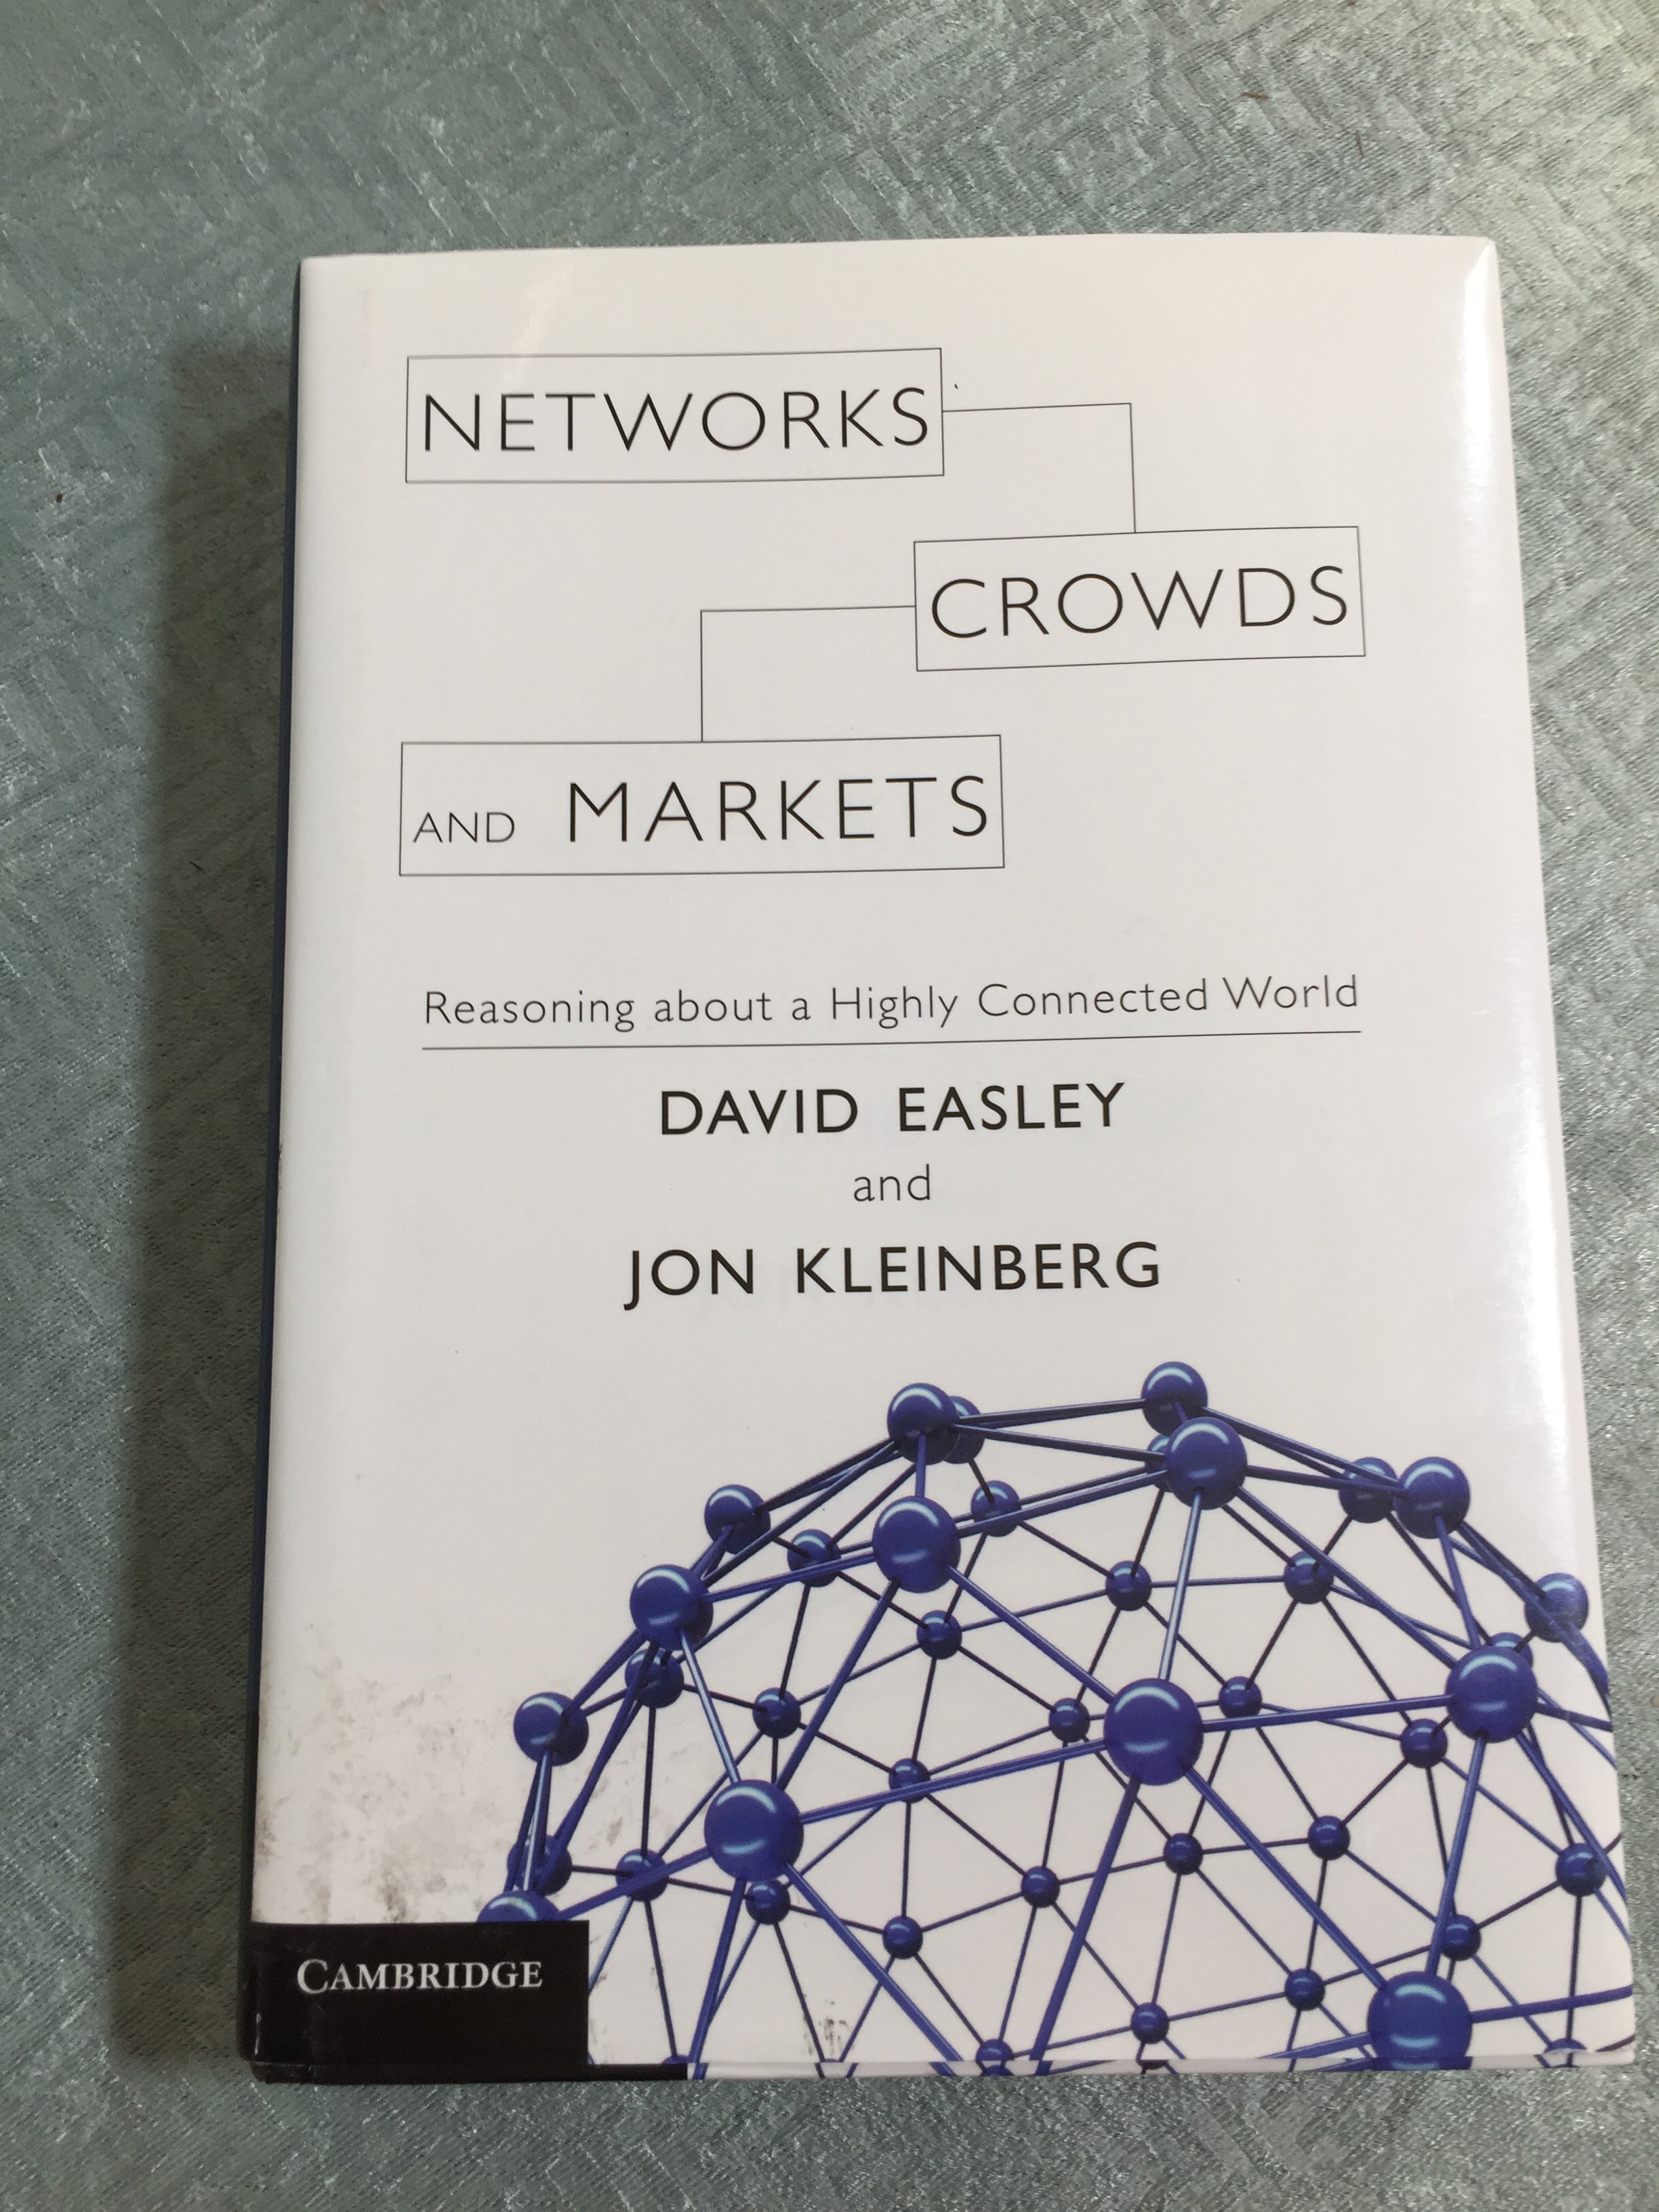 Networks, Crowds, and Markets: Reasoning about a Highly Connected World (7580057403630)